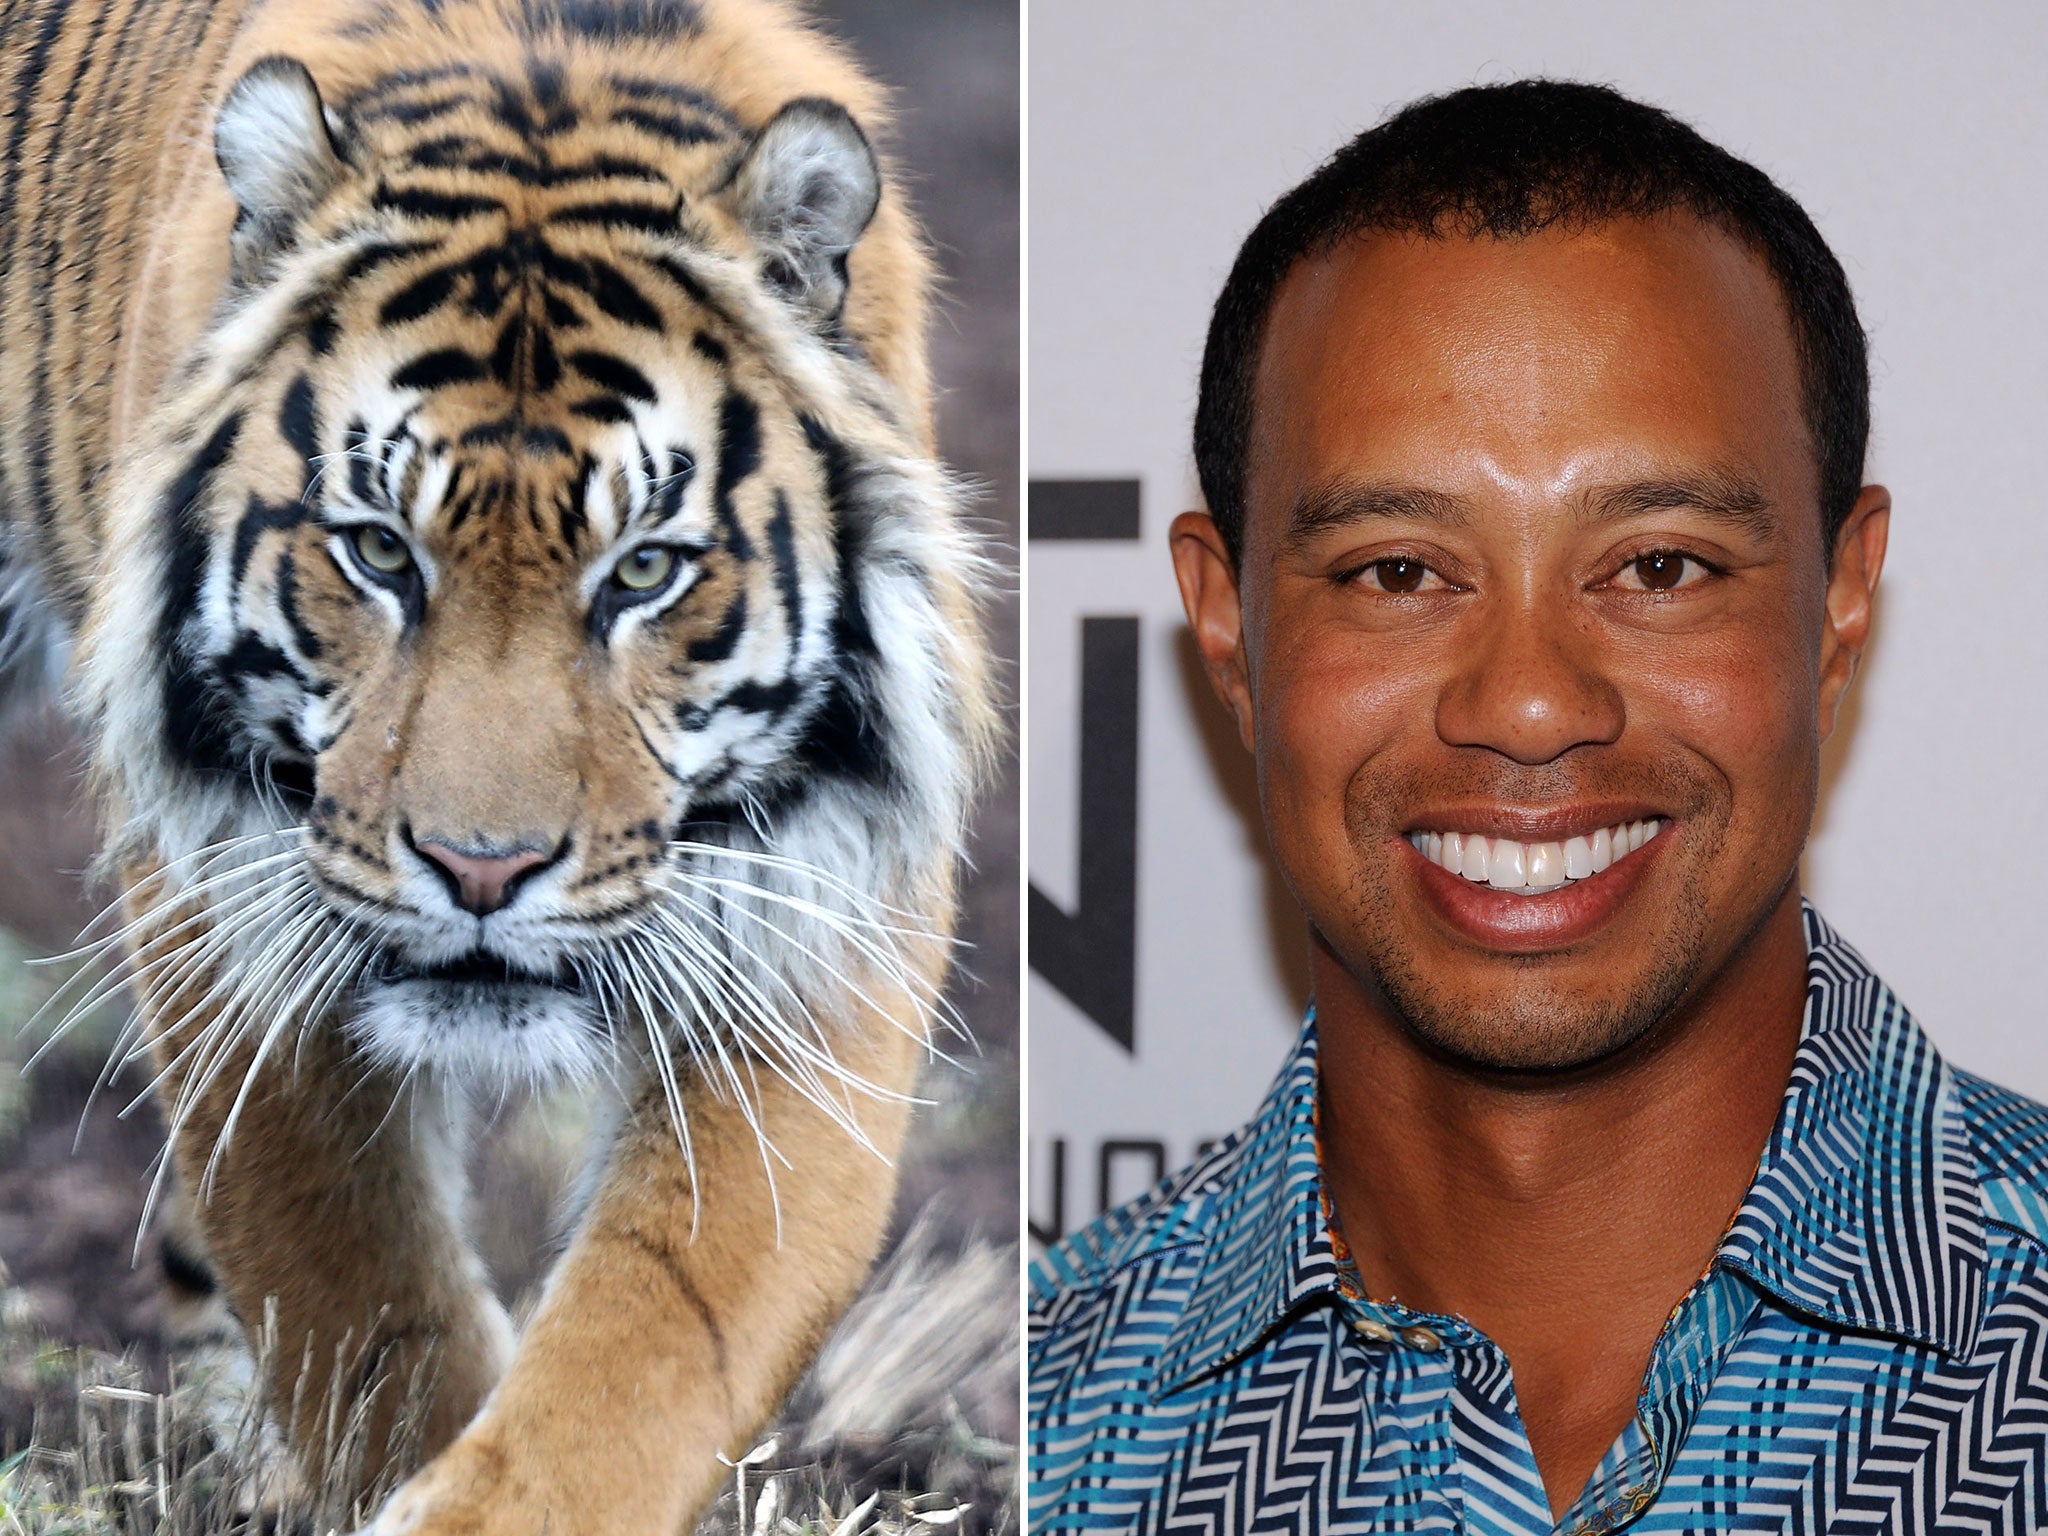 Woods the Tiger (not the golfer) has predicted a European win